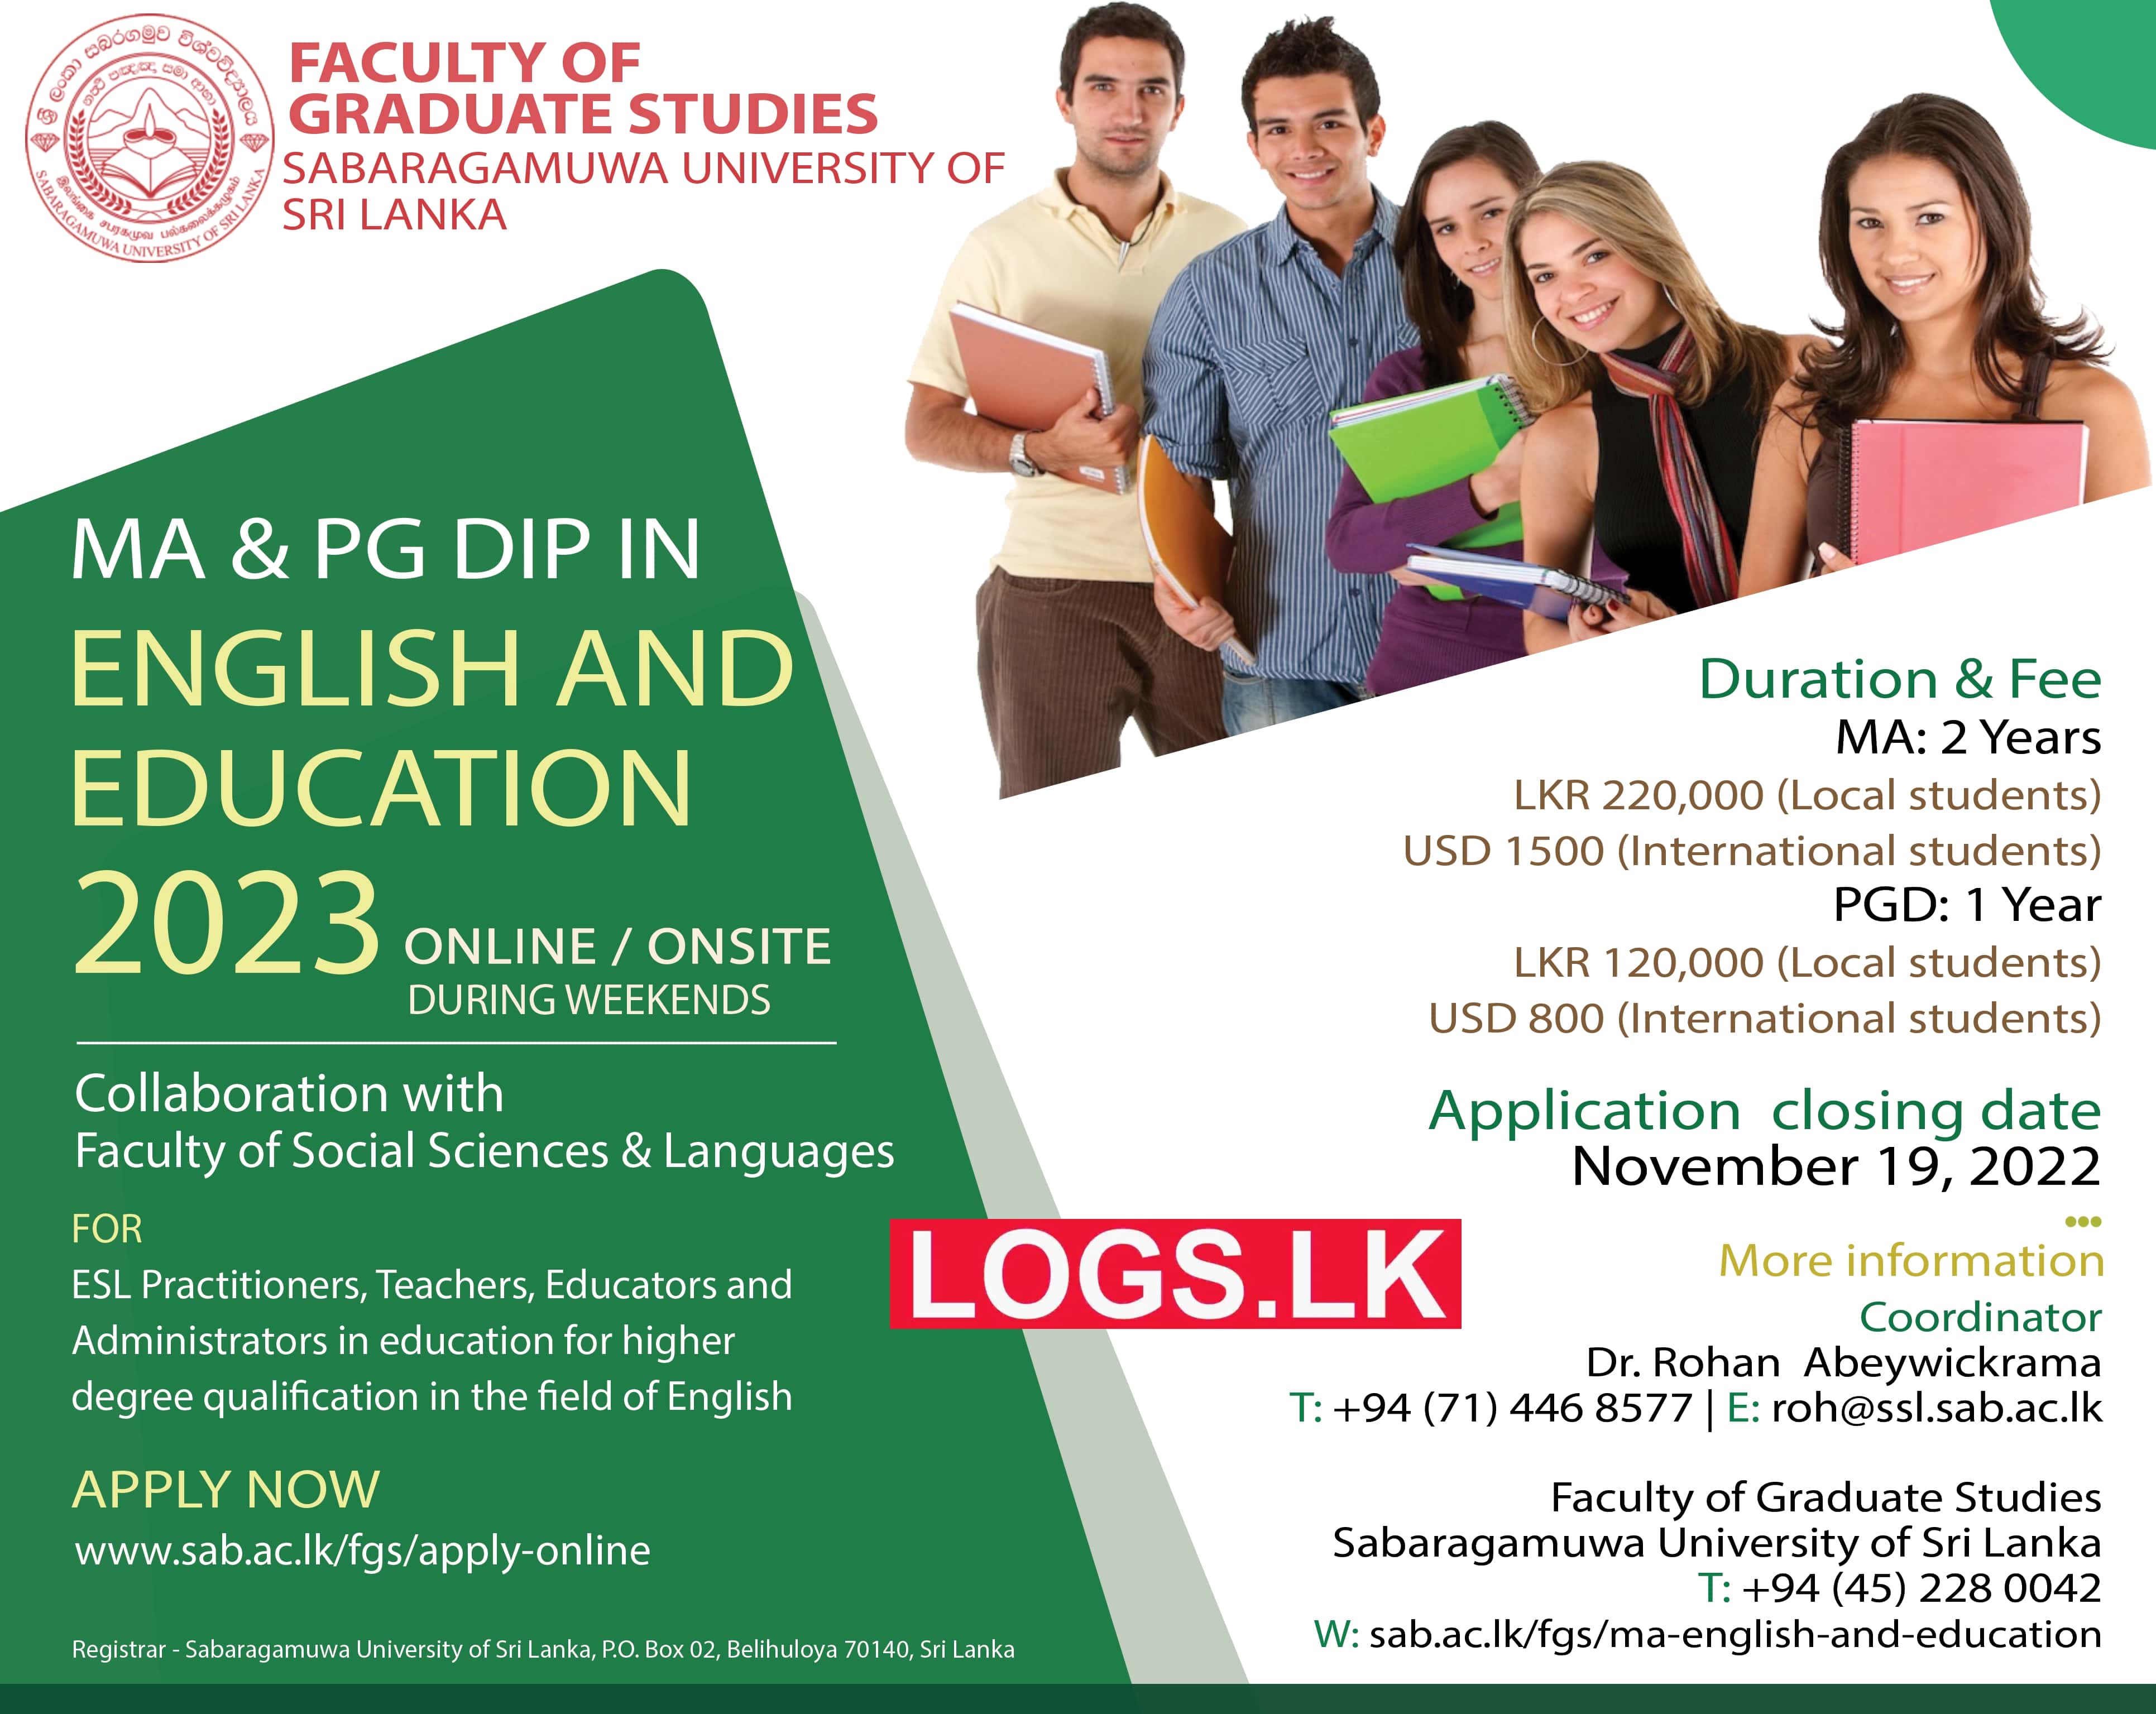 MA in English & Education Degree Programme - Sabaragamuwa University Courses Details, Application Form Download